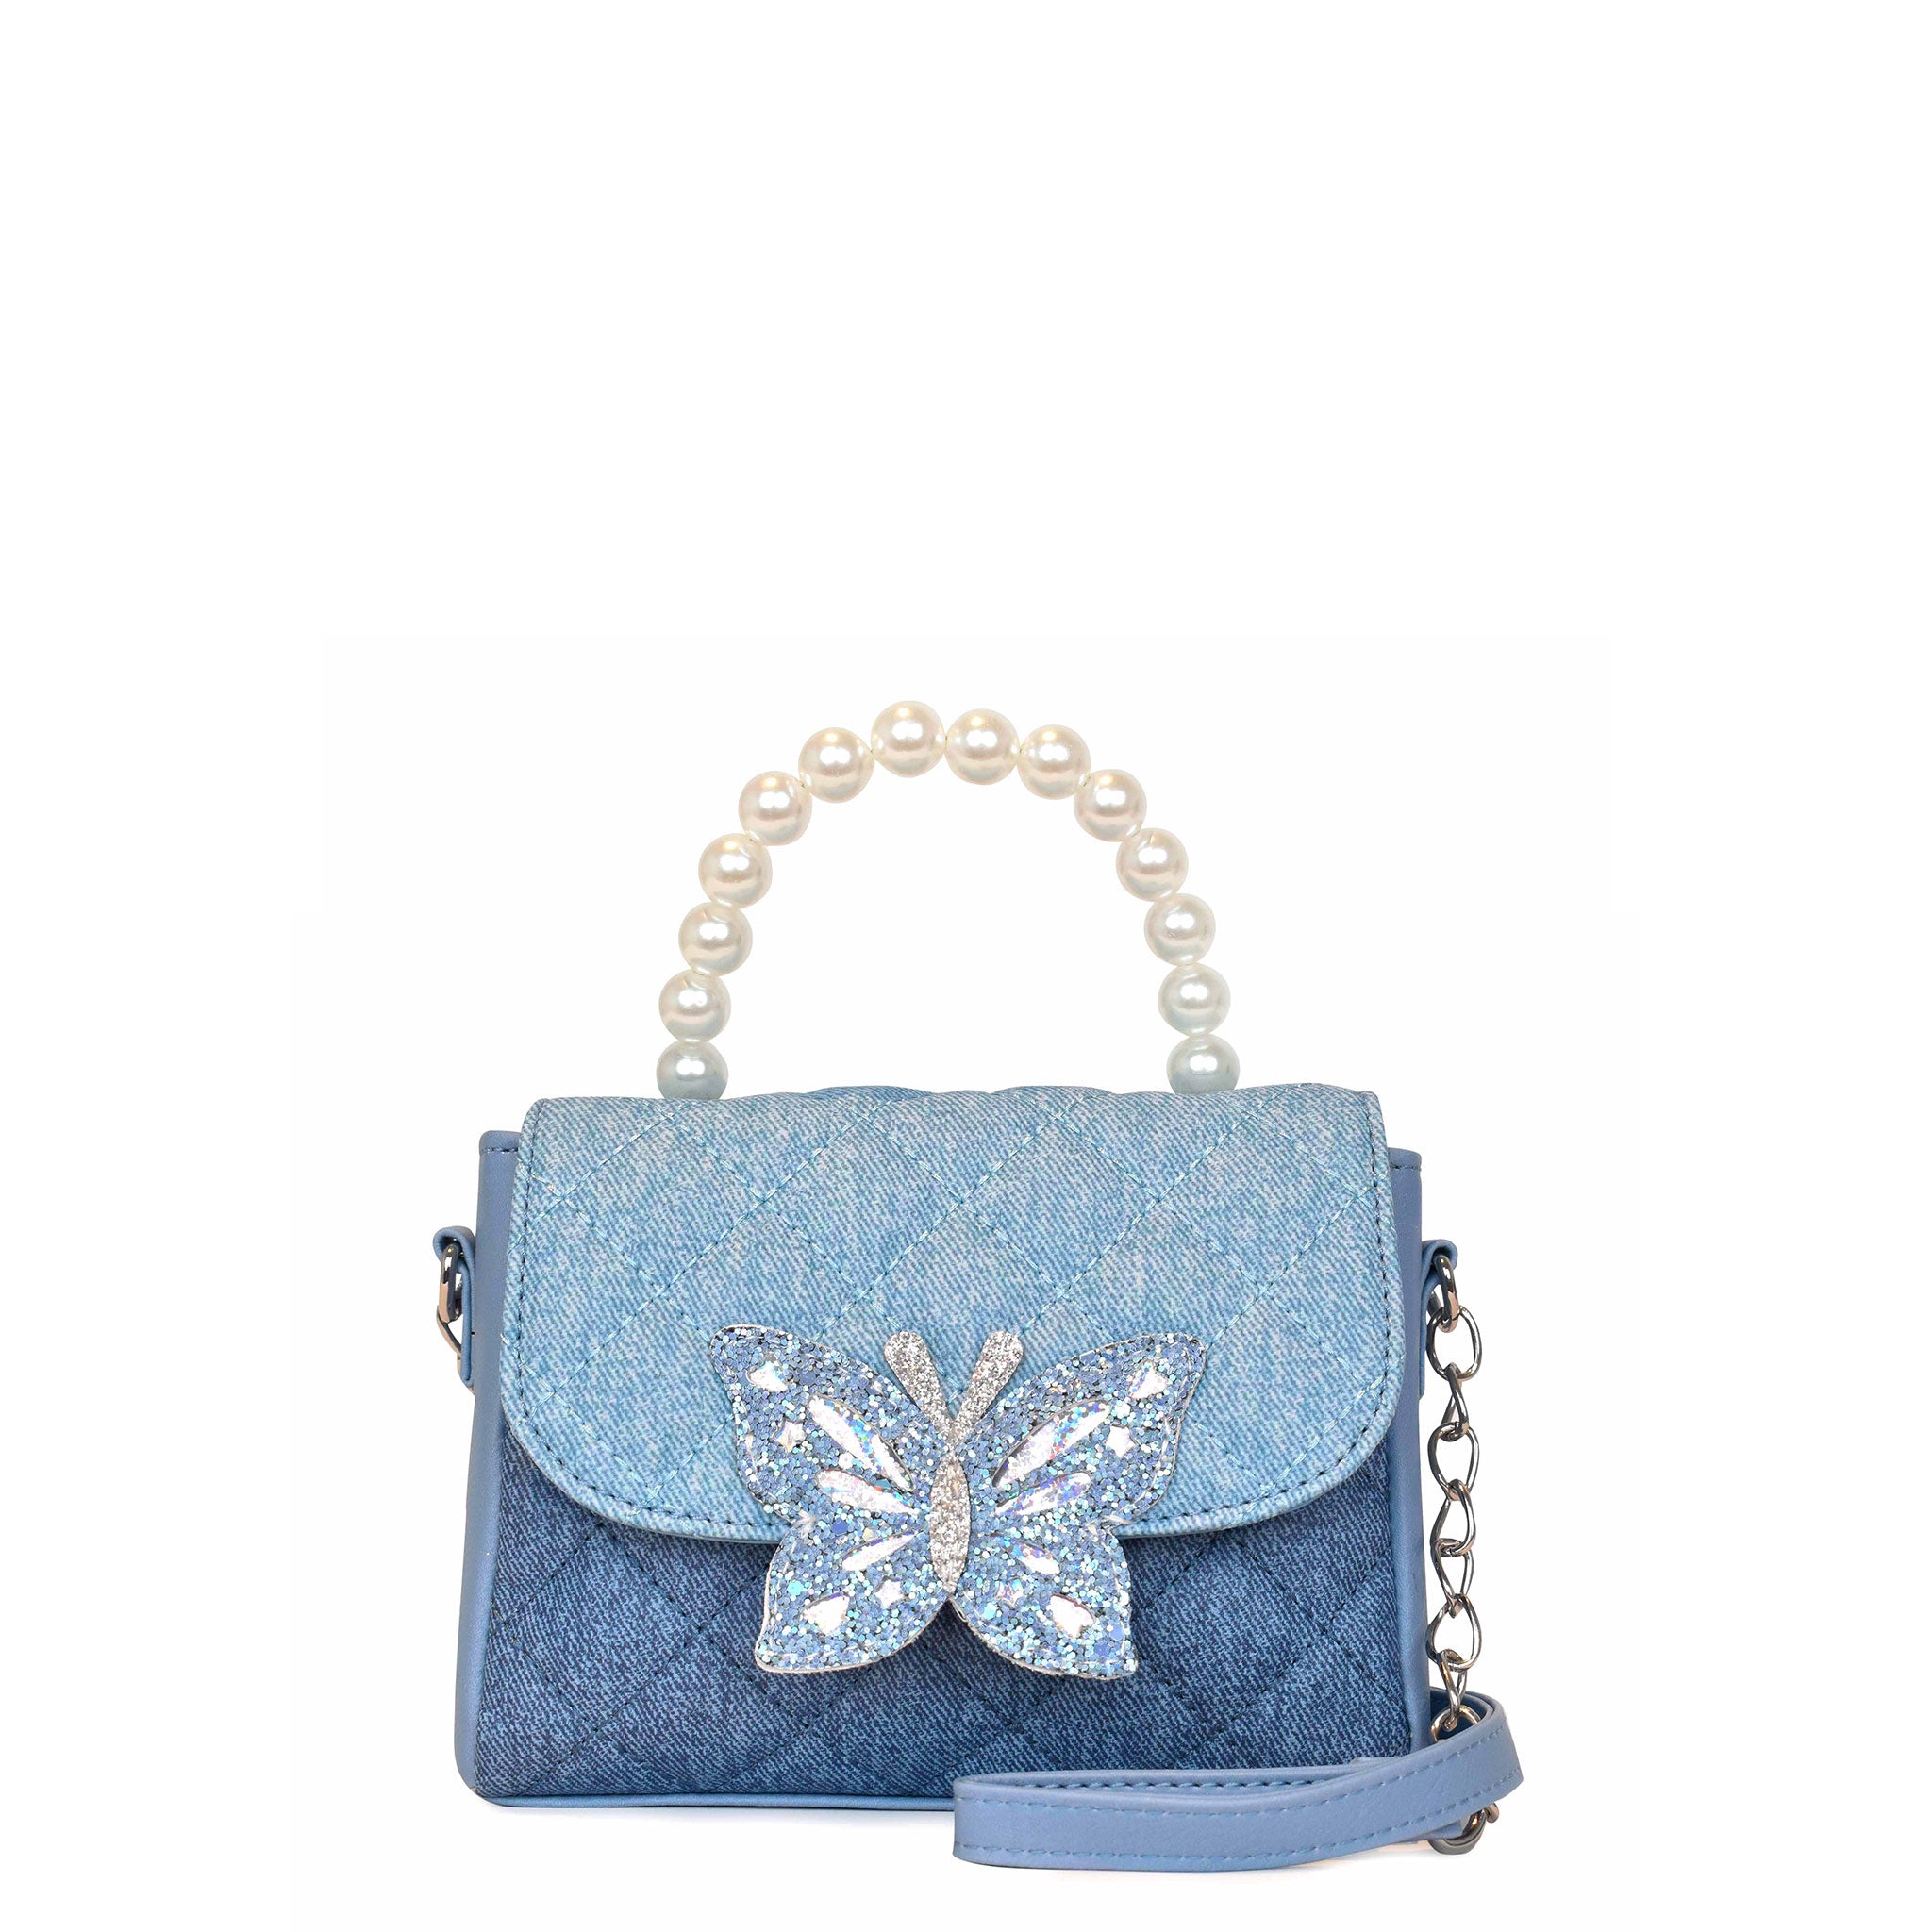 Front view of a two-toned denim quilted flap top crossbody with a pearl top handle and glitter butterfly closure button patch